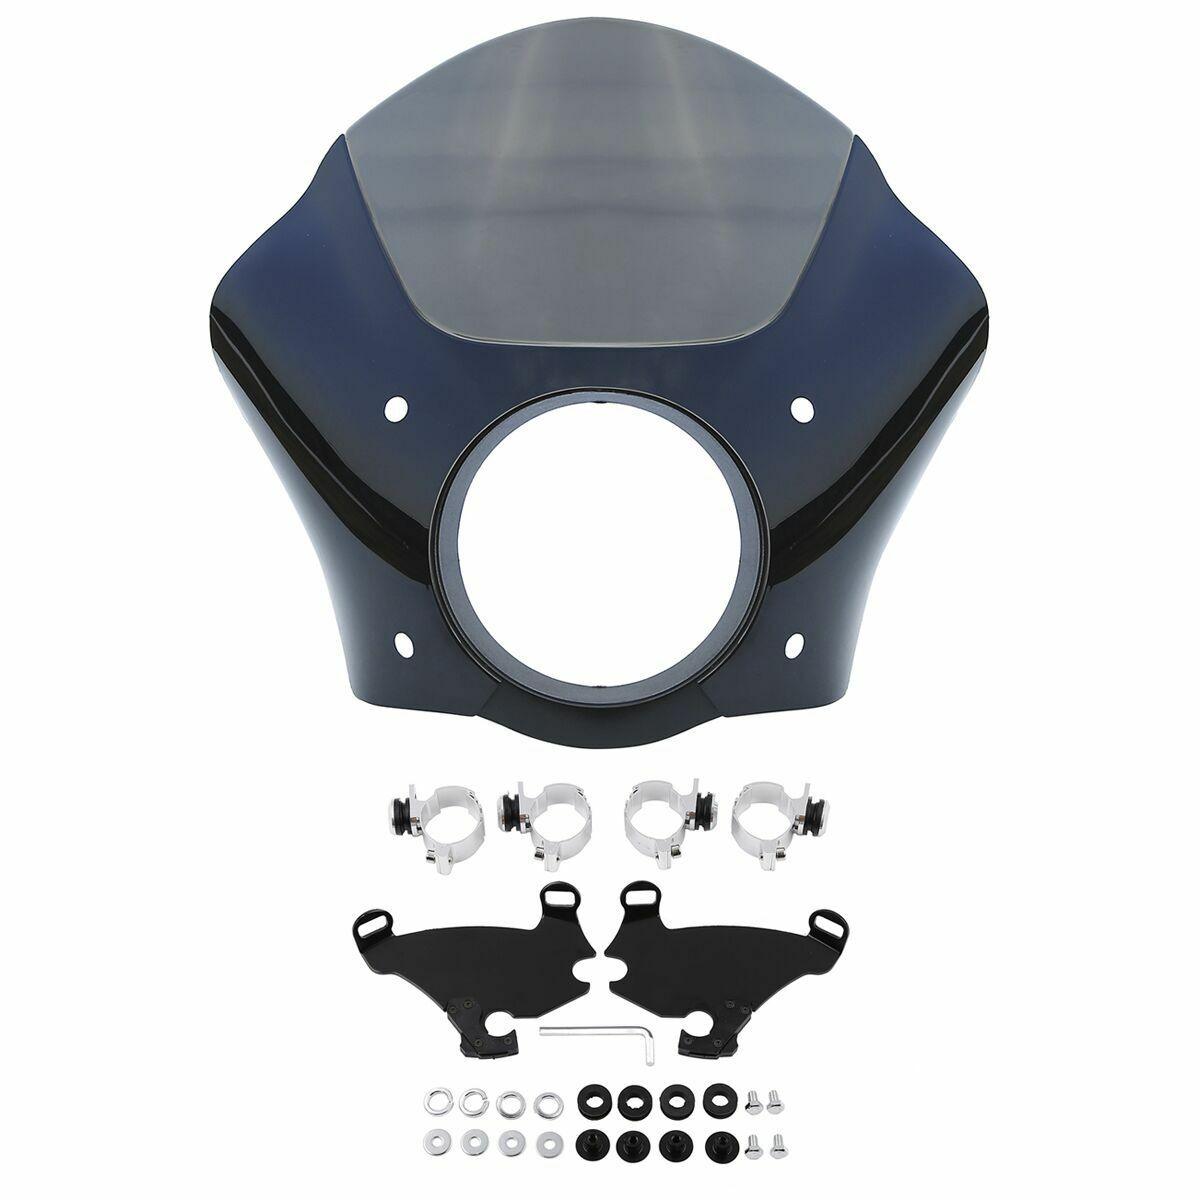 Gauntlet Fairing Bracket Mount Fit For Harley Sportster XL883 1200 48 1988-2022 - Moto Life Products